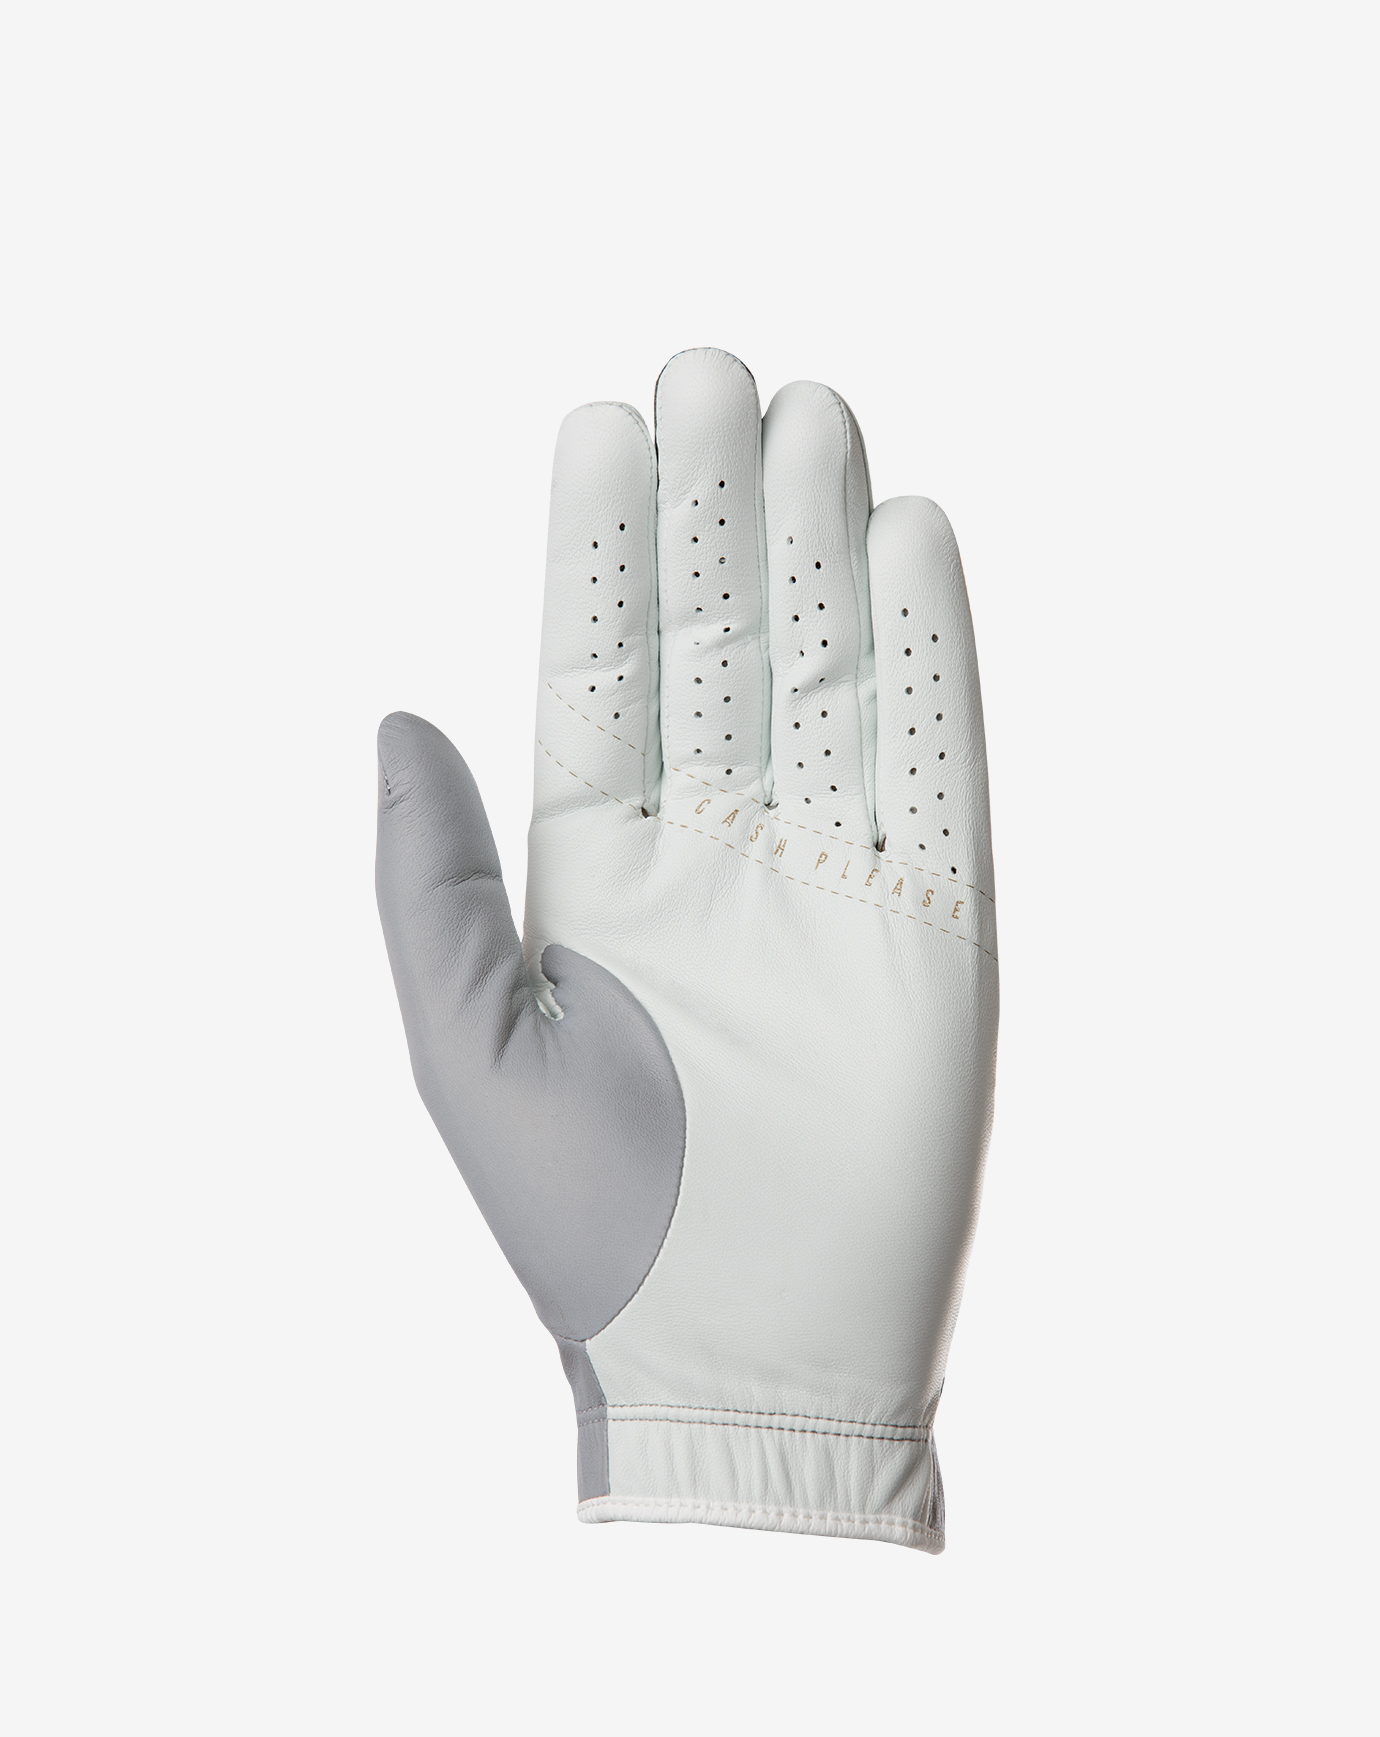 Firm Grip Dura-Knit Work Gloves - Industrial Designers Society of America